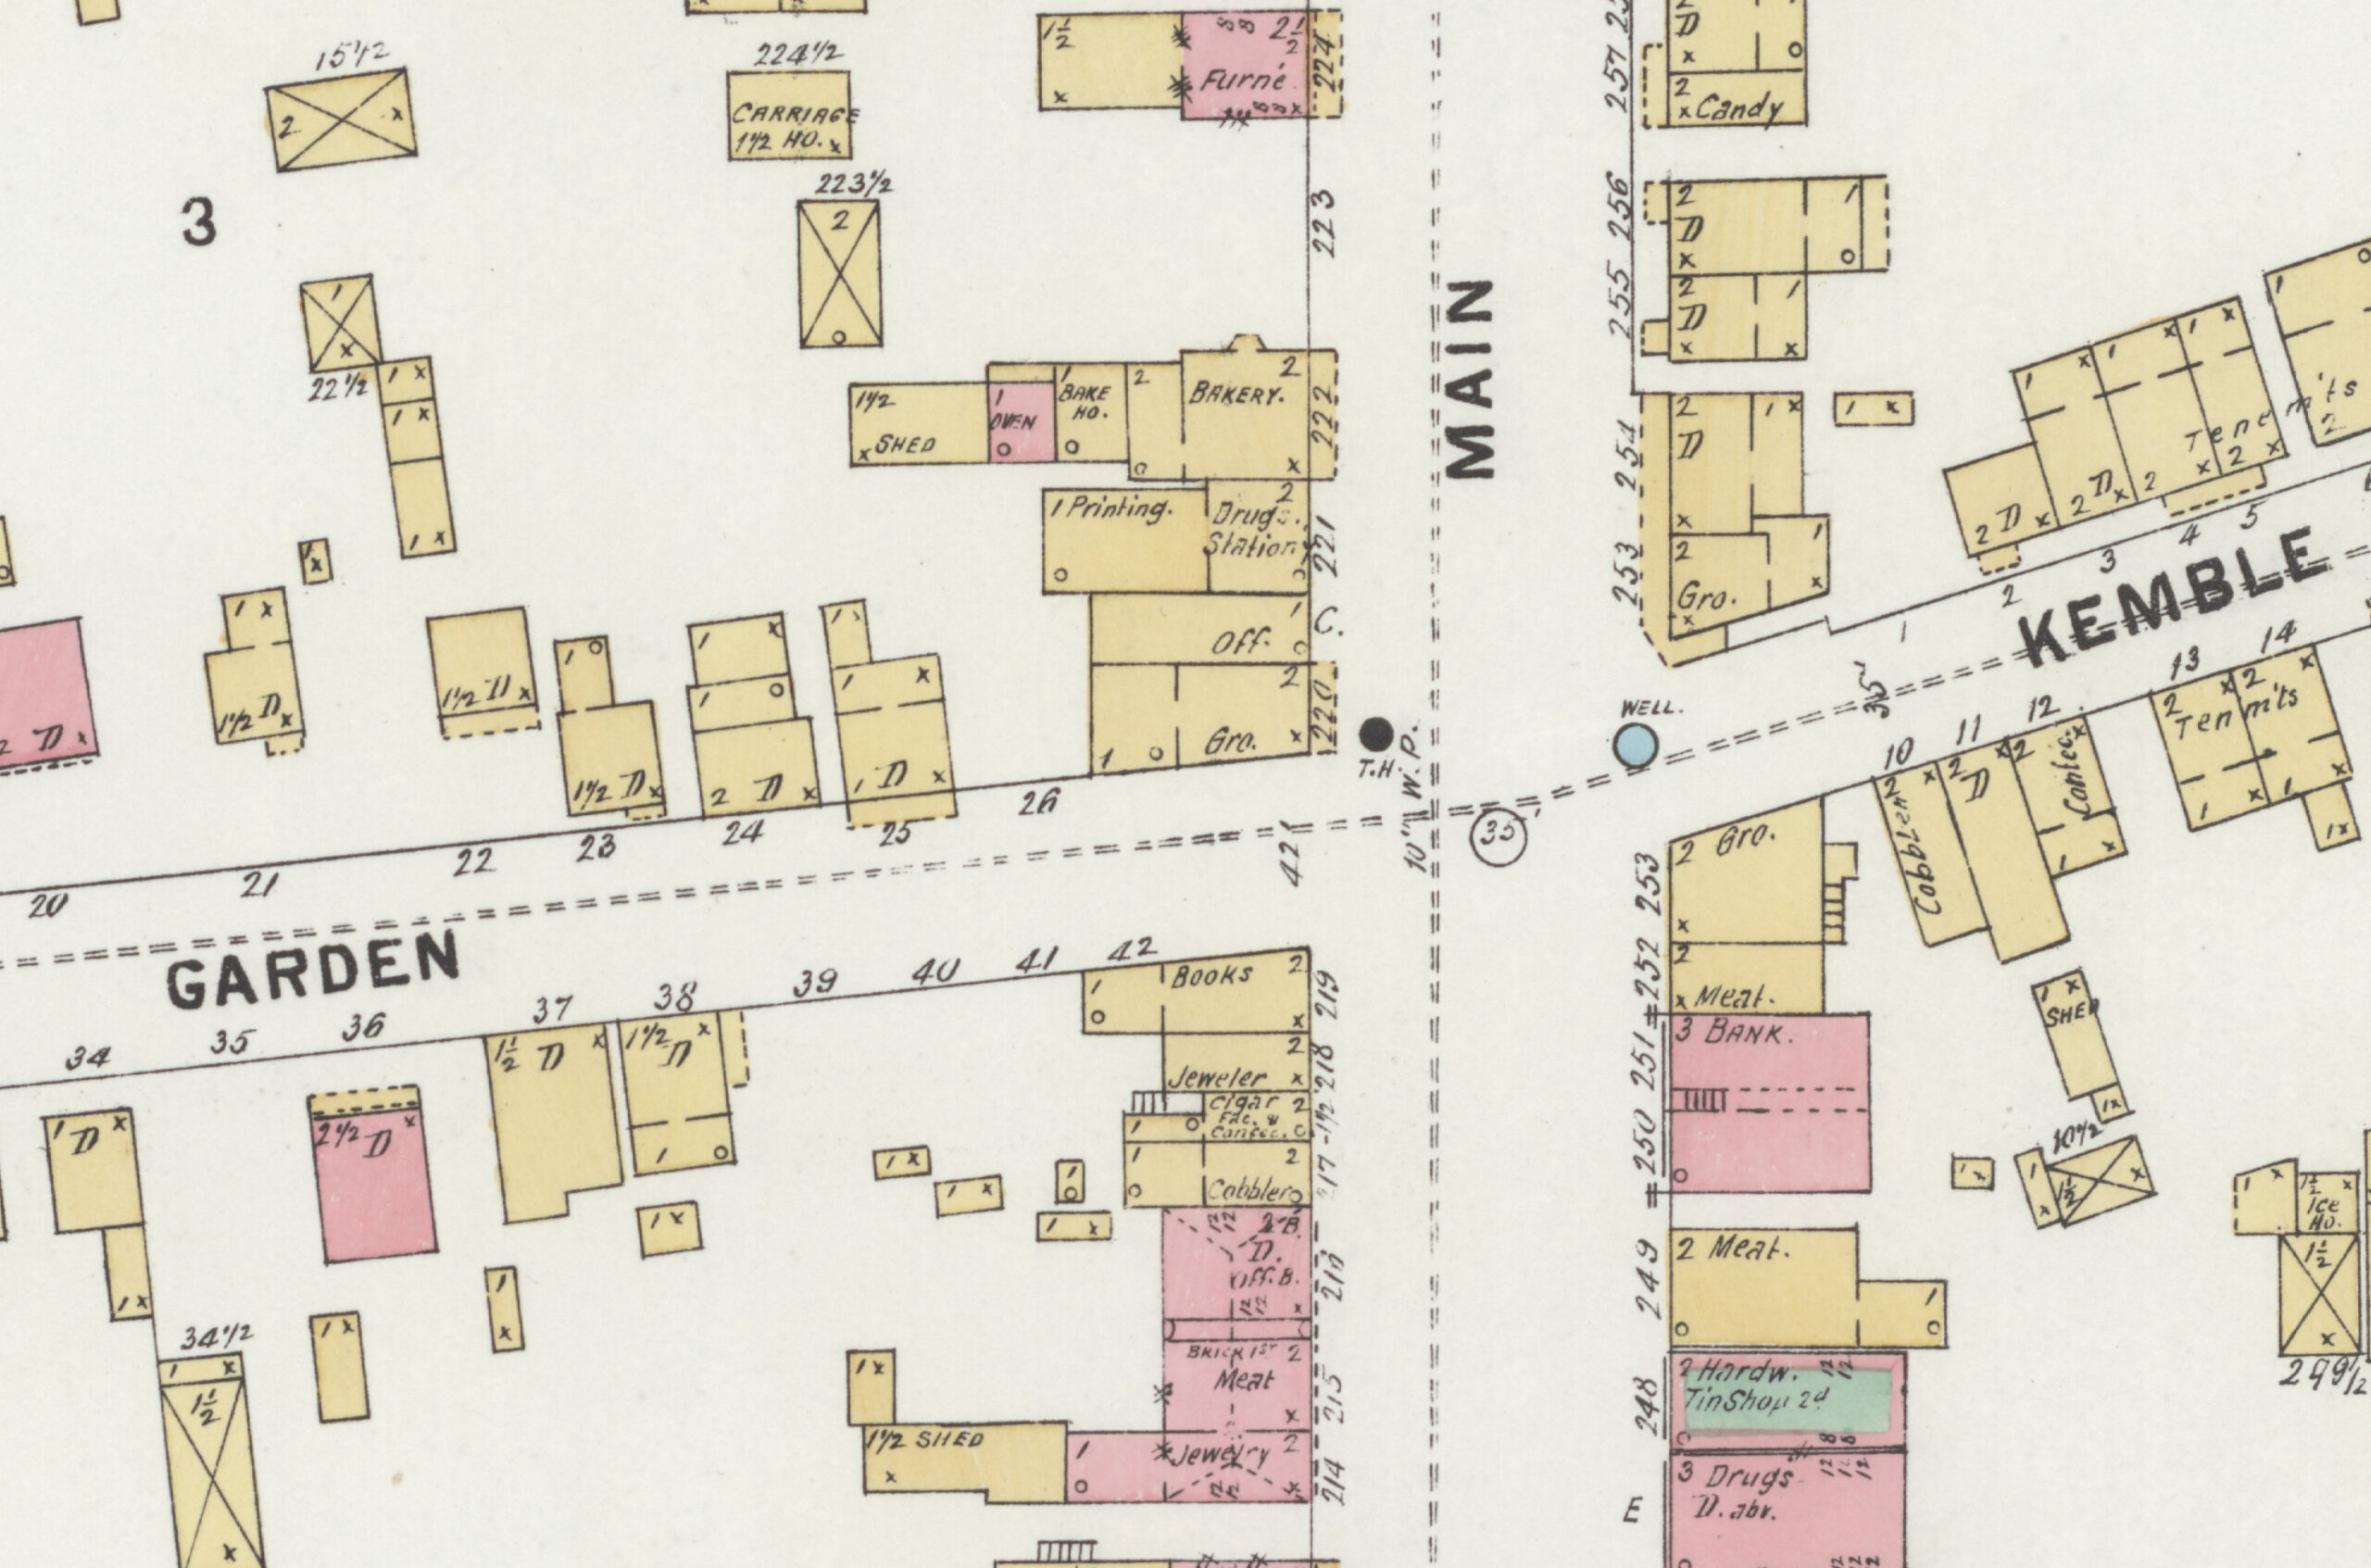 map showing wood frame houses in yellow with 8 garden street shown as 1 1/2 stories